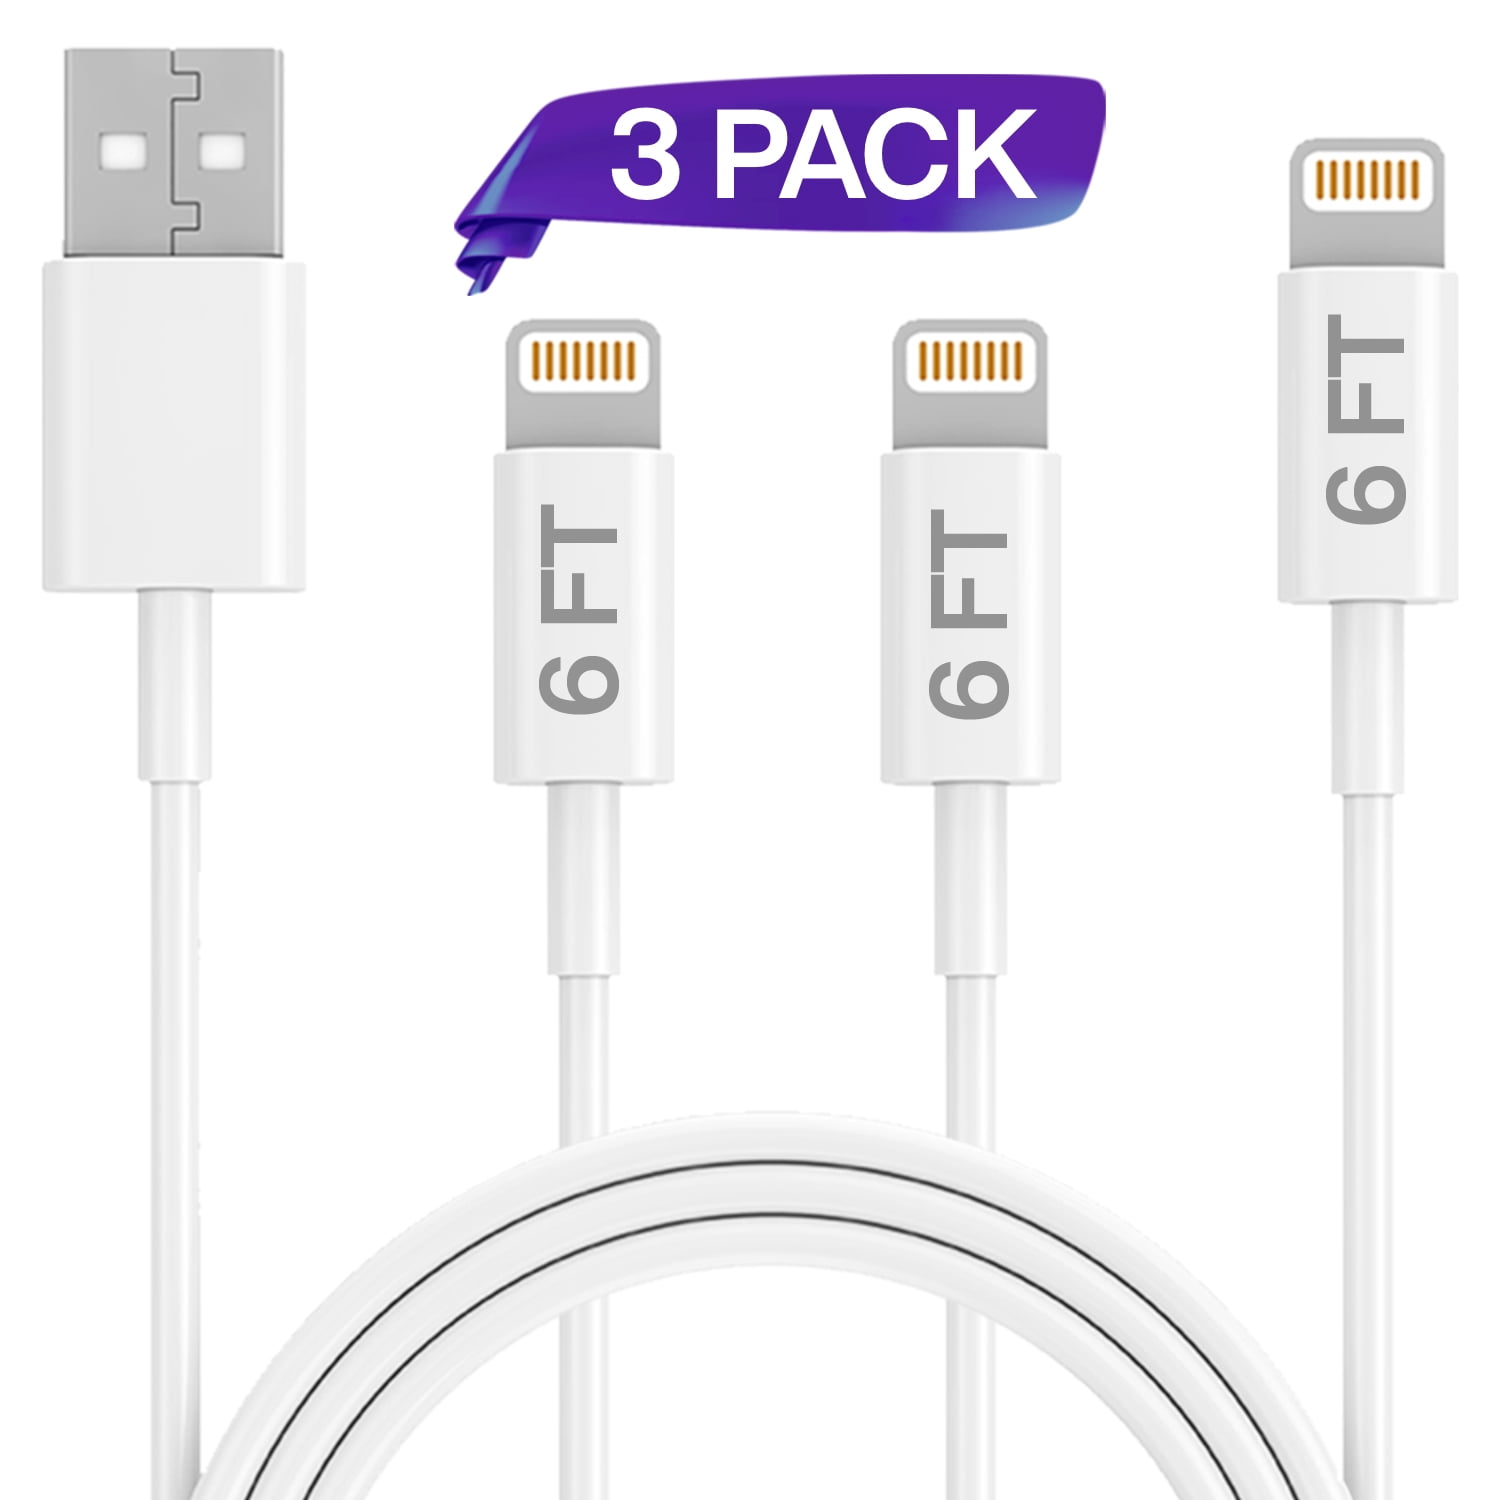 MFi Certified Lightning Cable Braided iPhone Lead Fast Charging Cable for iPhone 12 Pro Max Mini 11 Pro XR XS X 10 8 7 6s 6 Plus 5s 5 SE 2020 iPhone Charger,Aioneus iPhone Charger Cable 2Pack 2M+2M